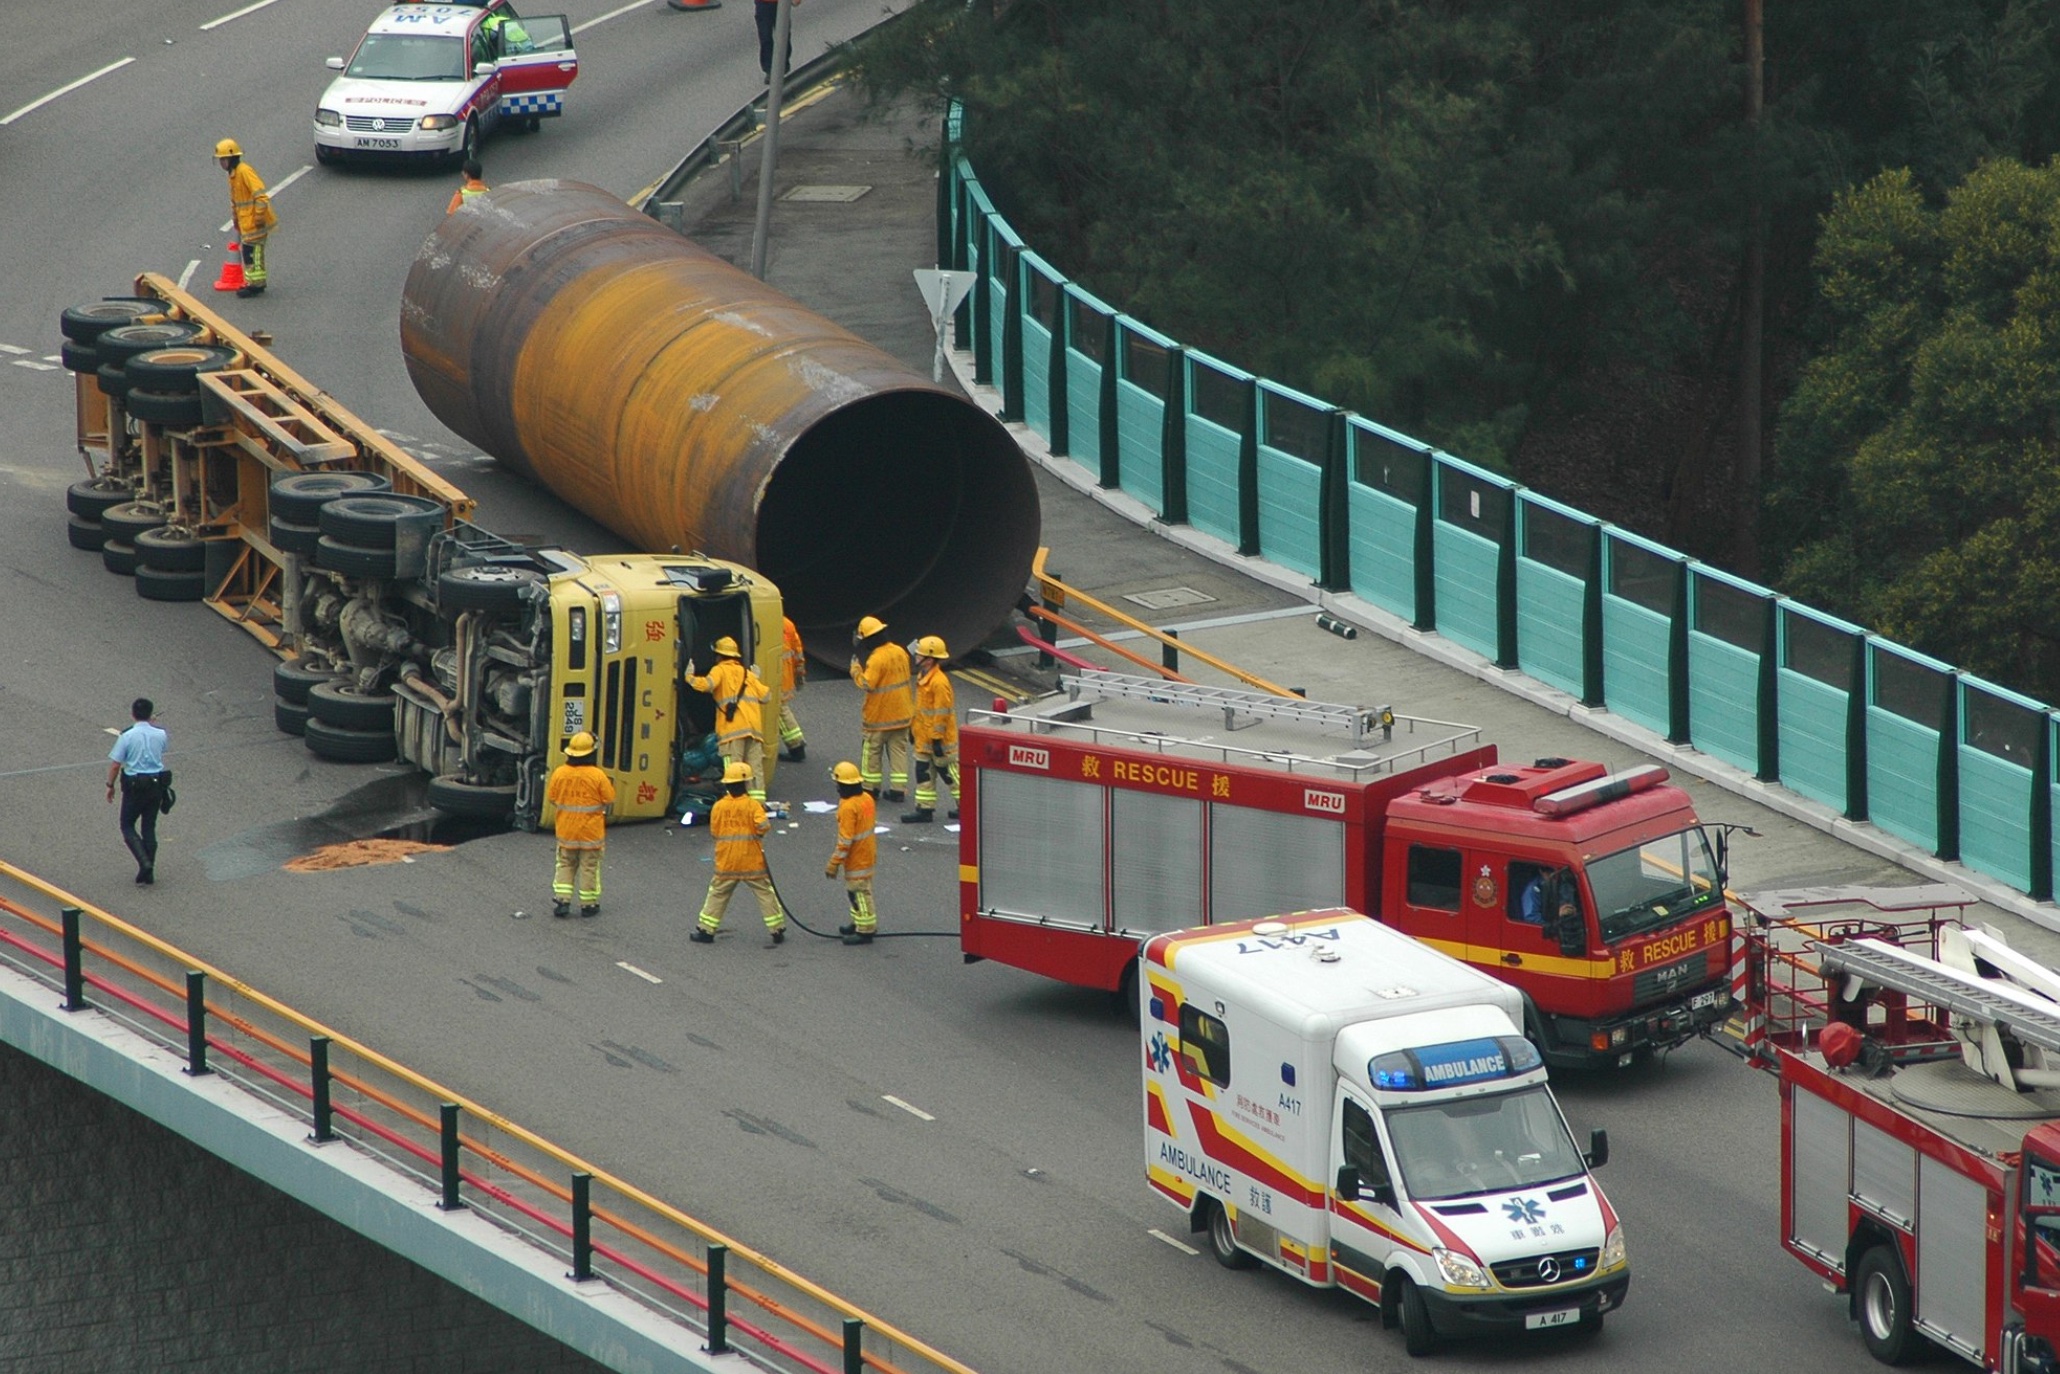 Truck accident; image by Mk2010, CC BY-SA 3.0, via Wikimedia Commons.